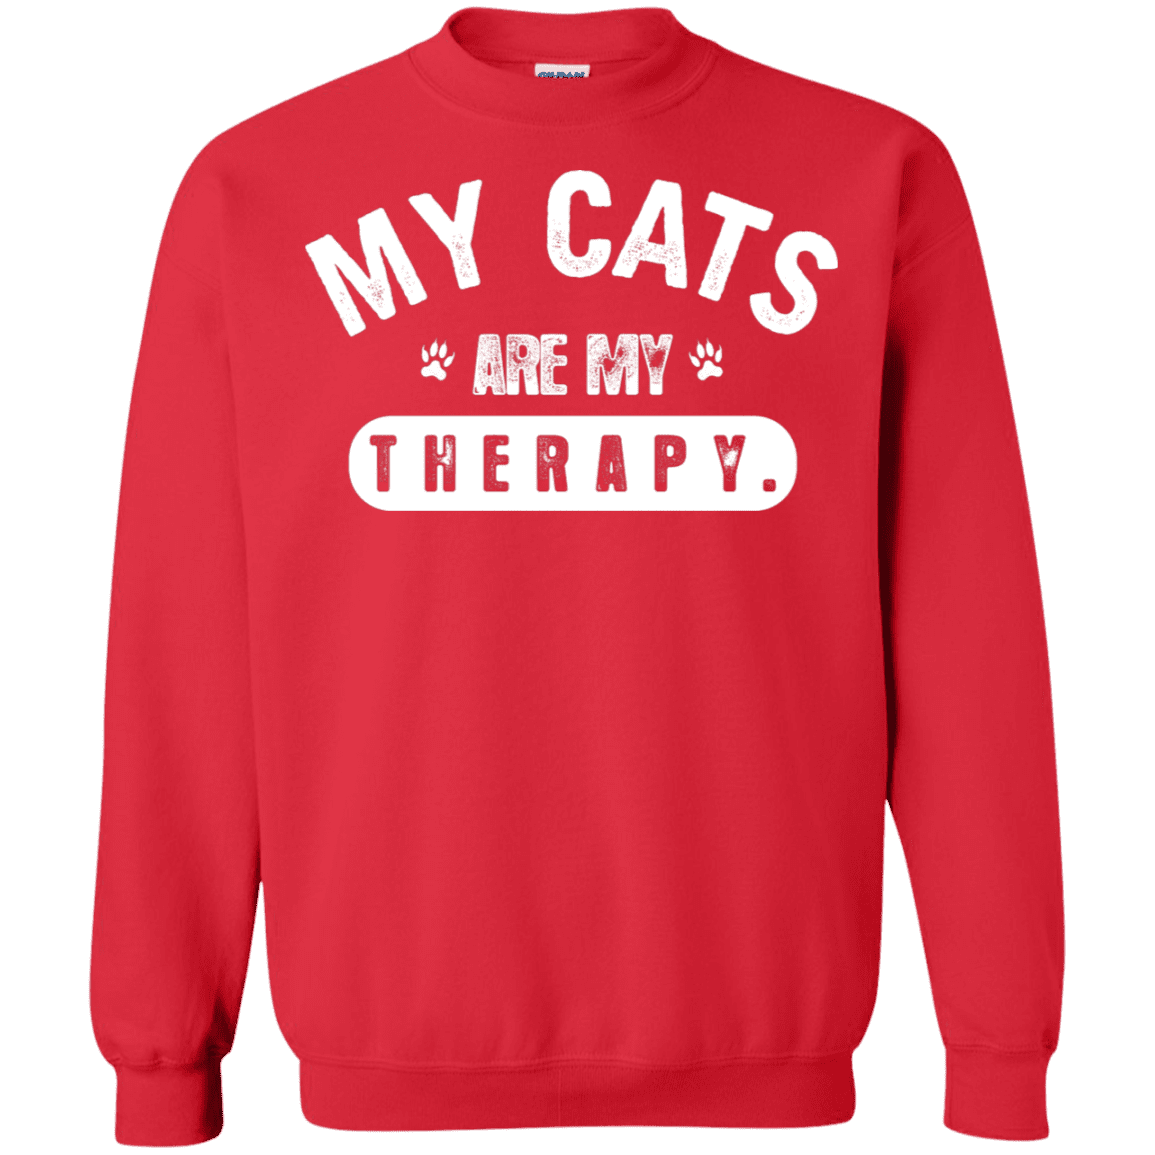 My Cats Are My Therapy - Sweatshirt.